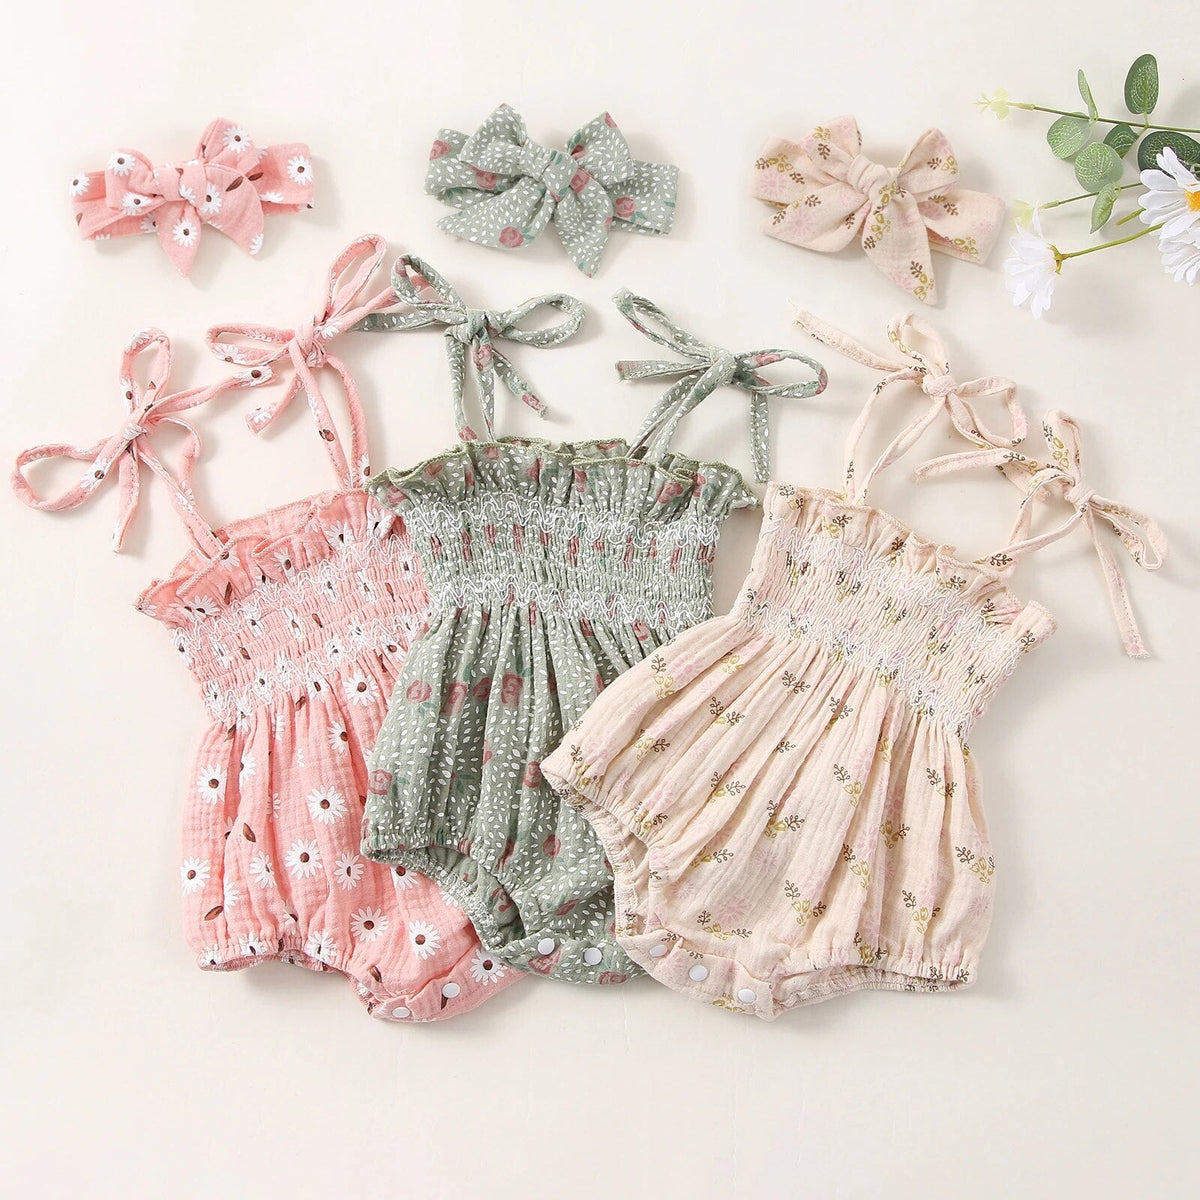 Dainty Floral Romper and Bow - The Ollie Bee